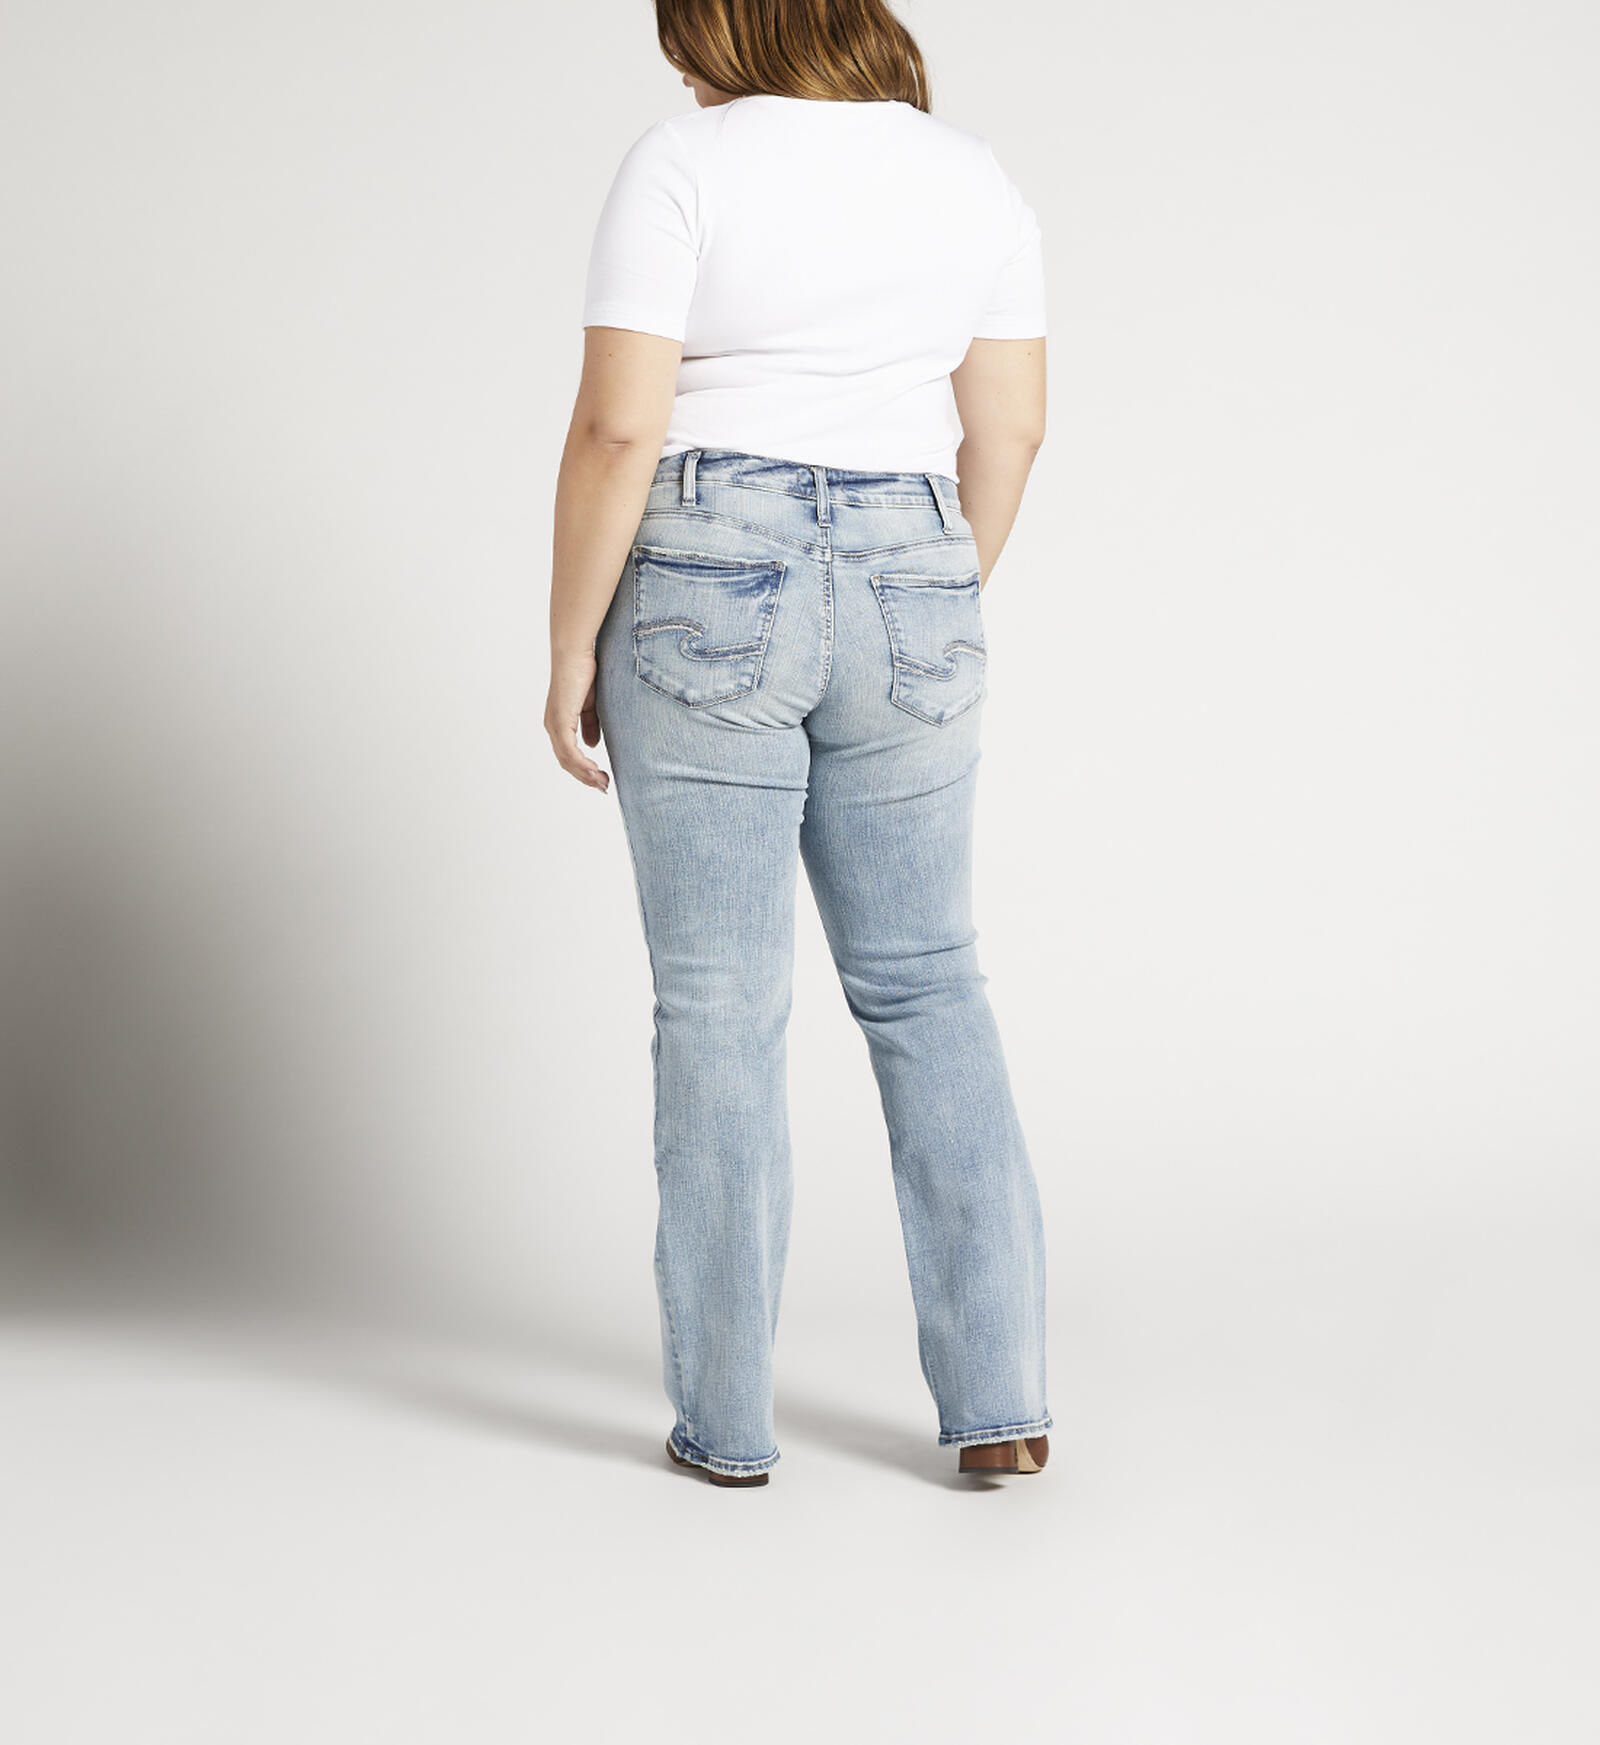 Buy Suki Mid Rise Slim Bootcut Jeans Plus Size for CAD 80.00